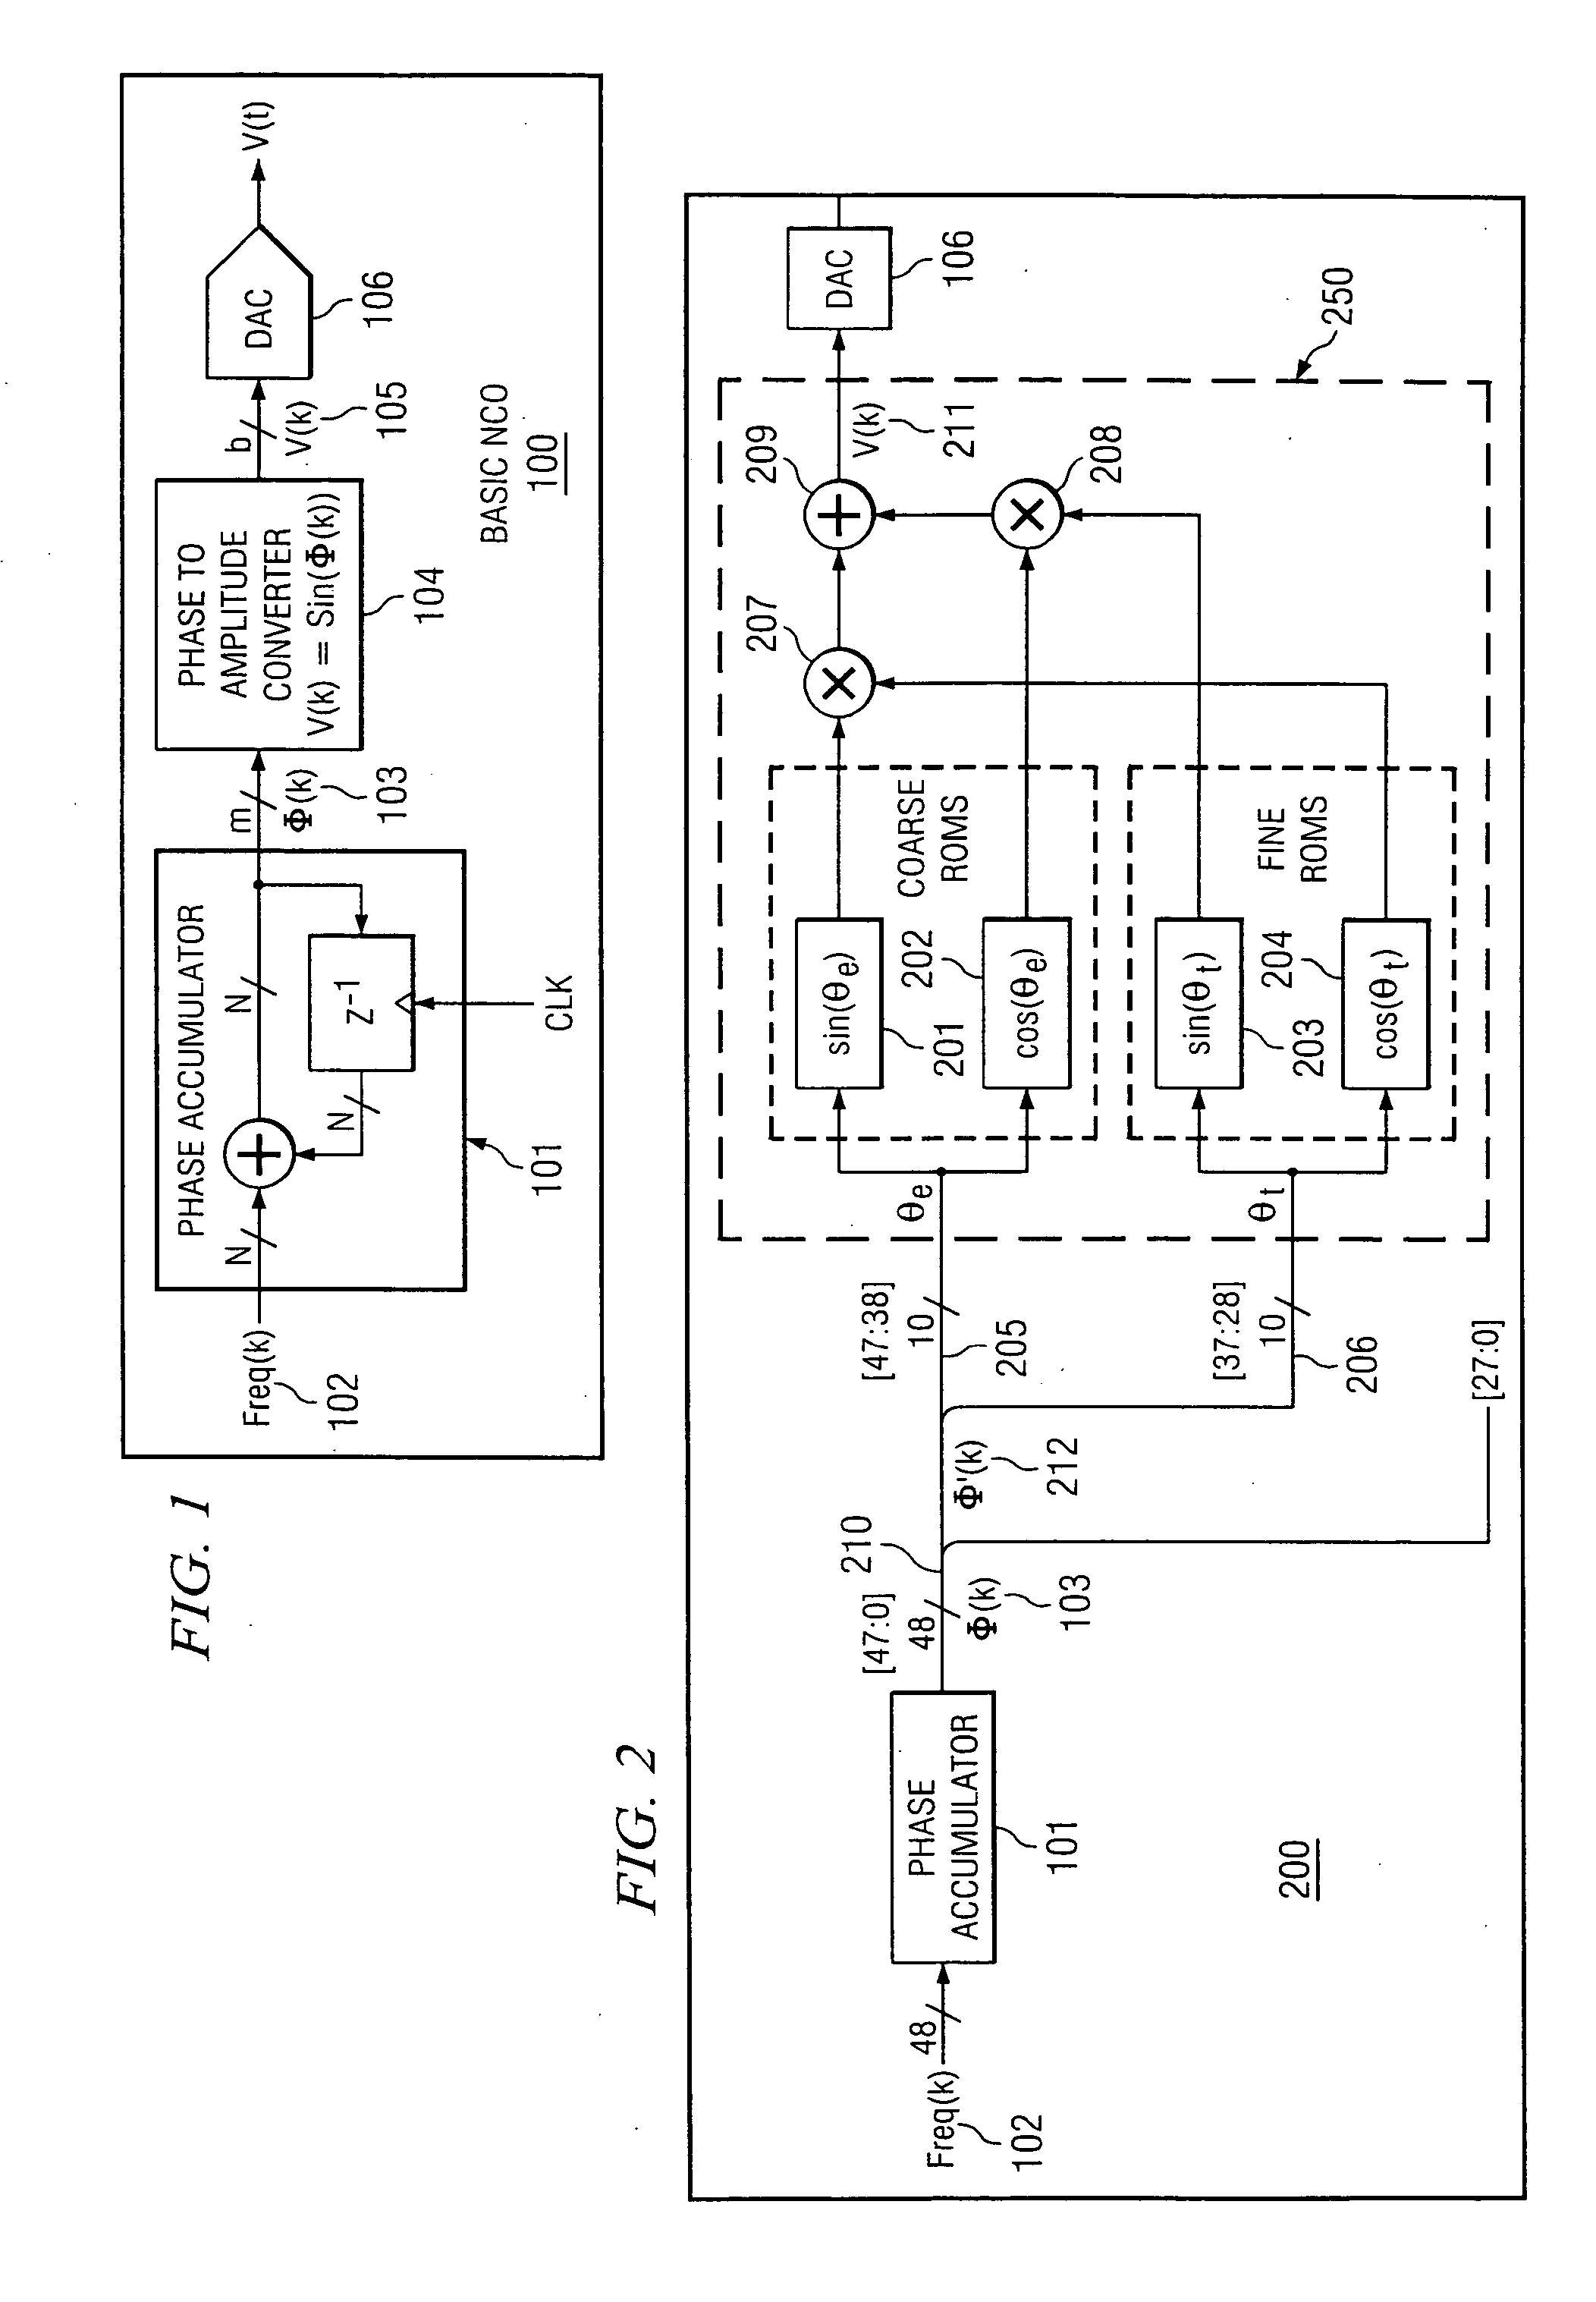 Numerically controlled oscillator and method of operation